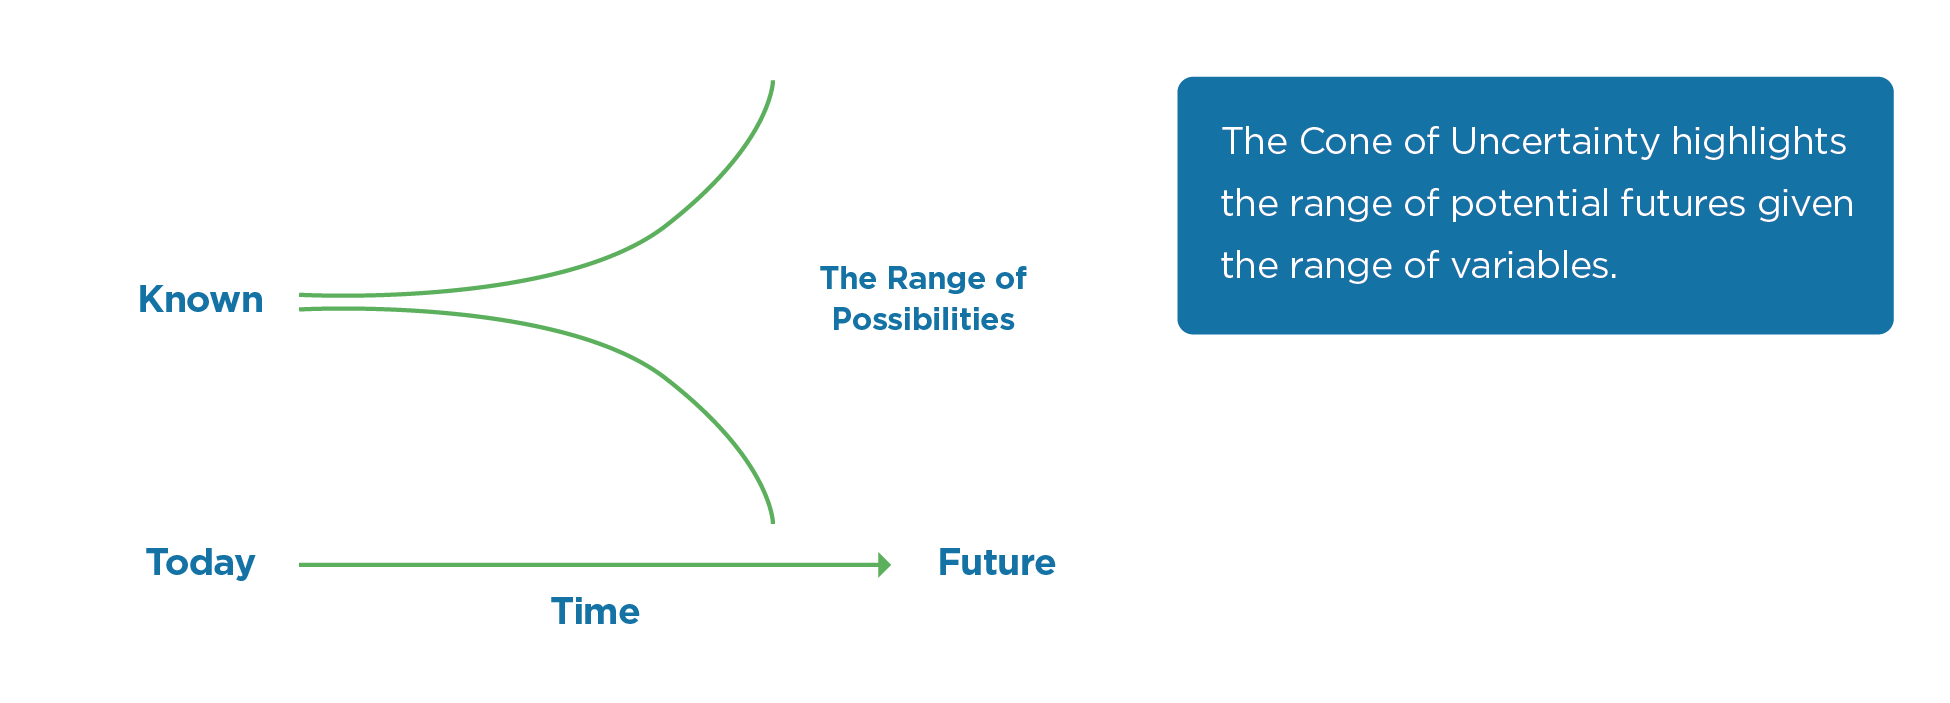 A visual representation of the Cone of Uncertainty, showing a diverging green curve from "Today" to "Future" on a timeline, illustrating the increase in the range of possibilities over time.